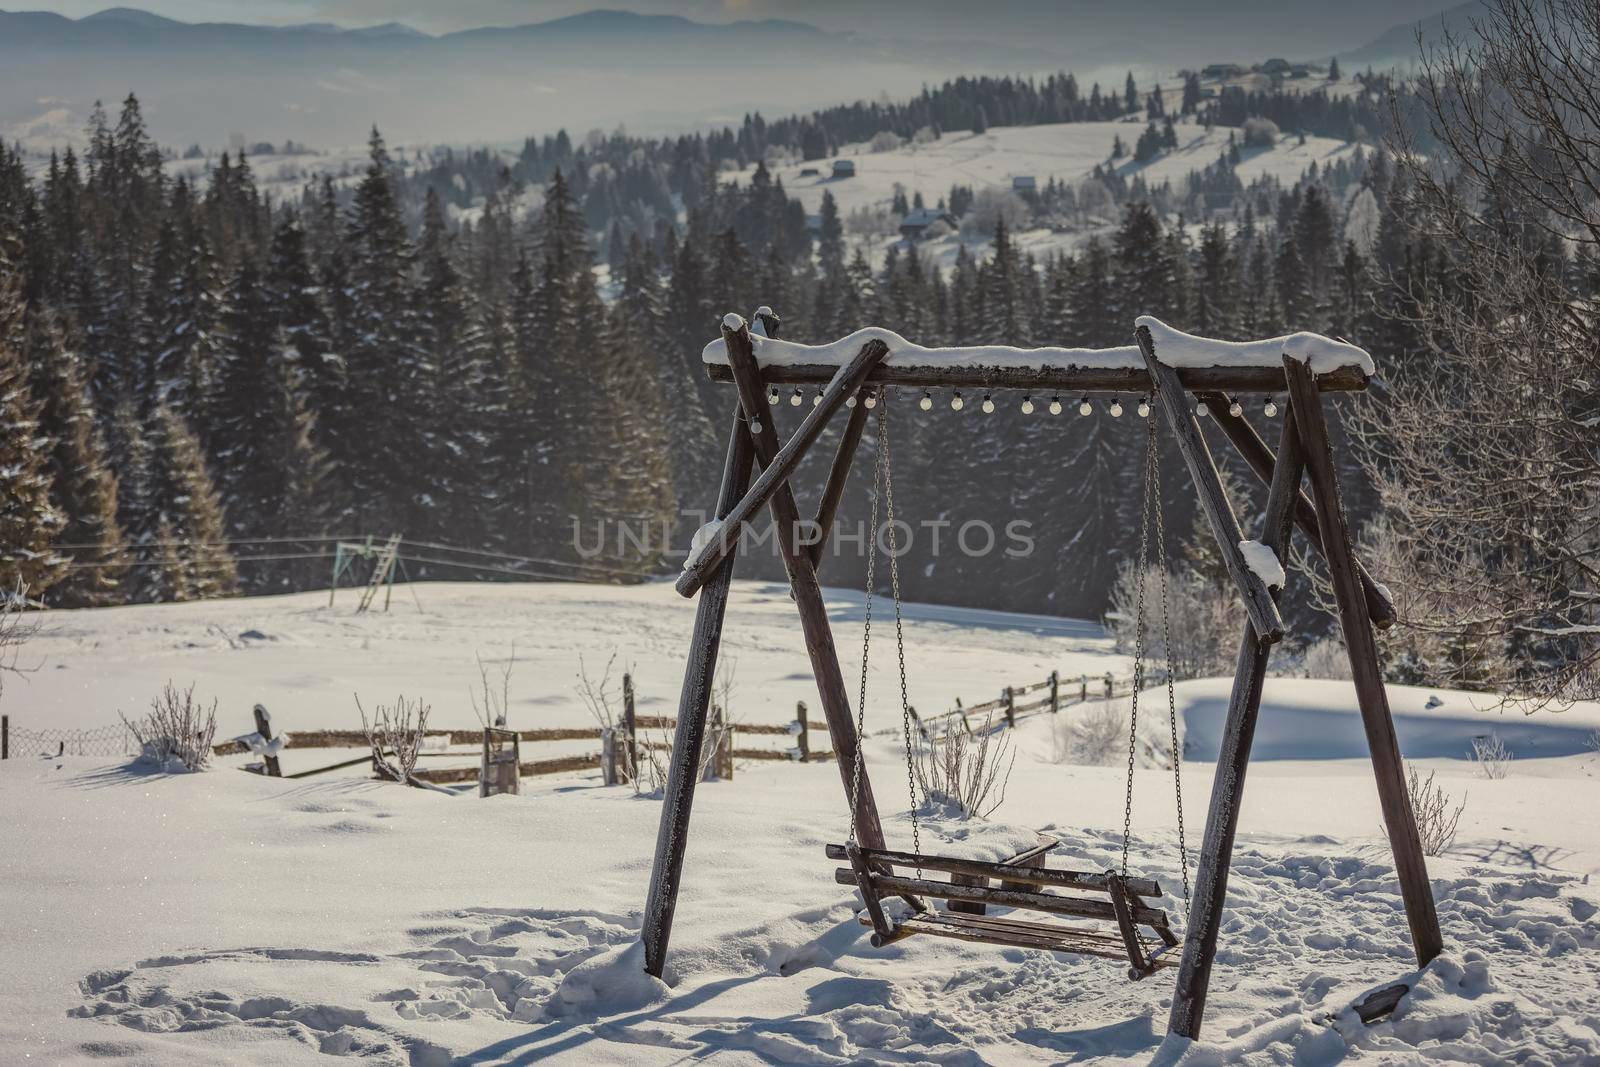 wooden swing against the backdrop of forest snow-capped mountains